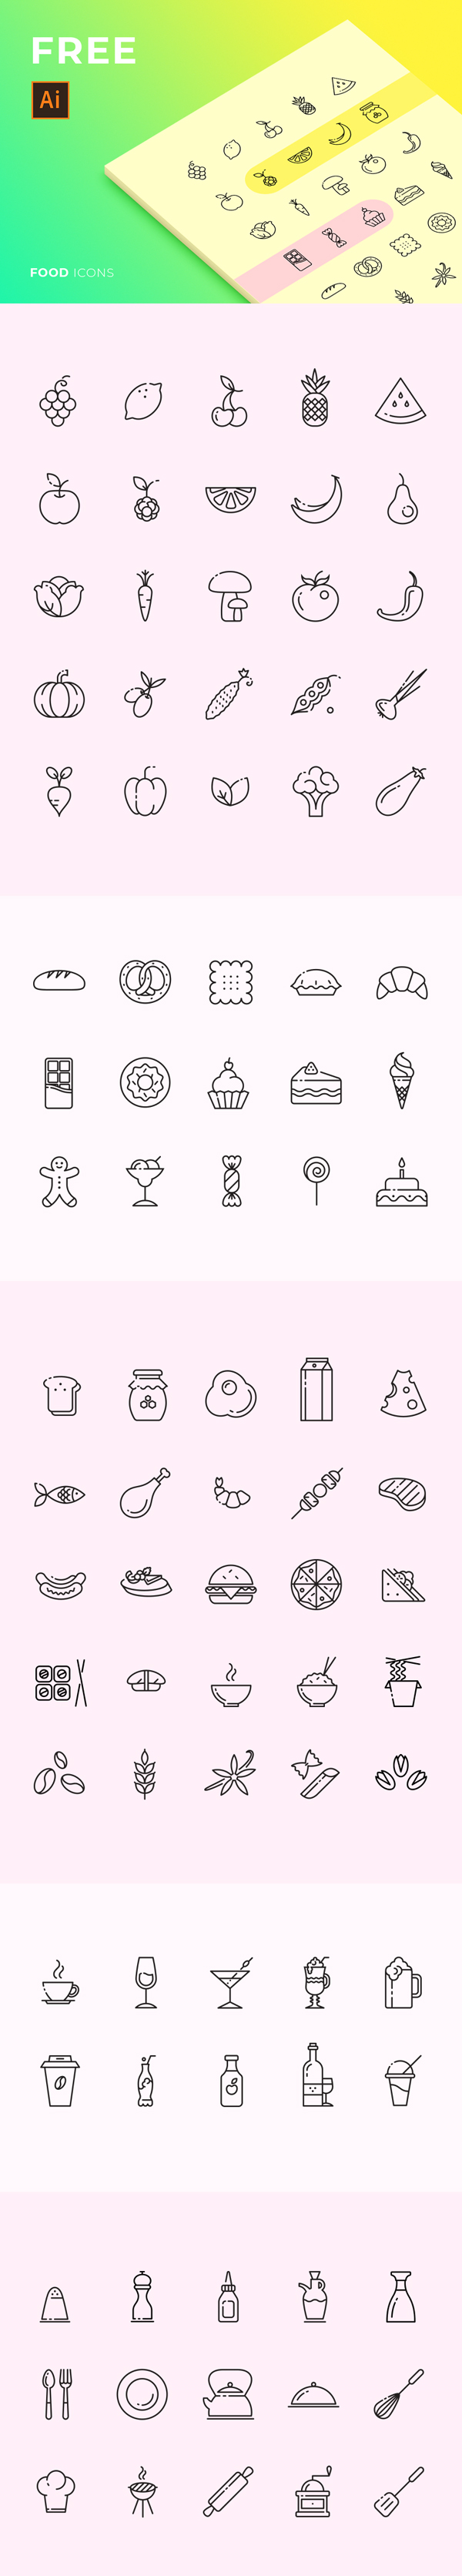 Food and Drink Free Icons